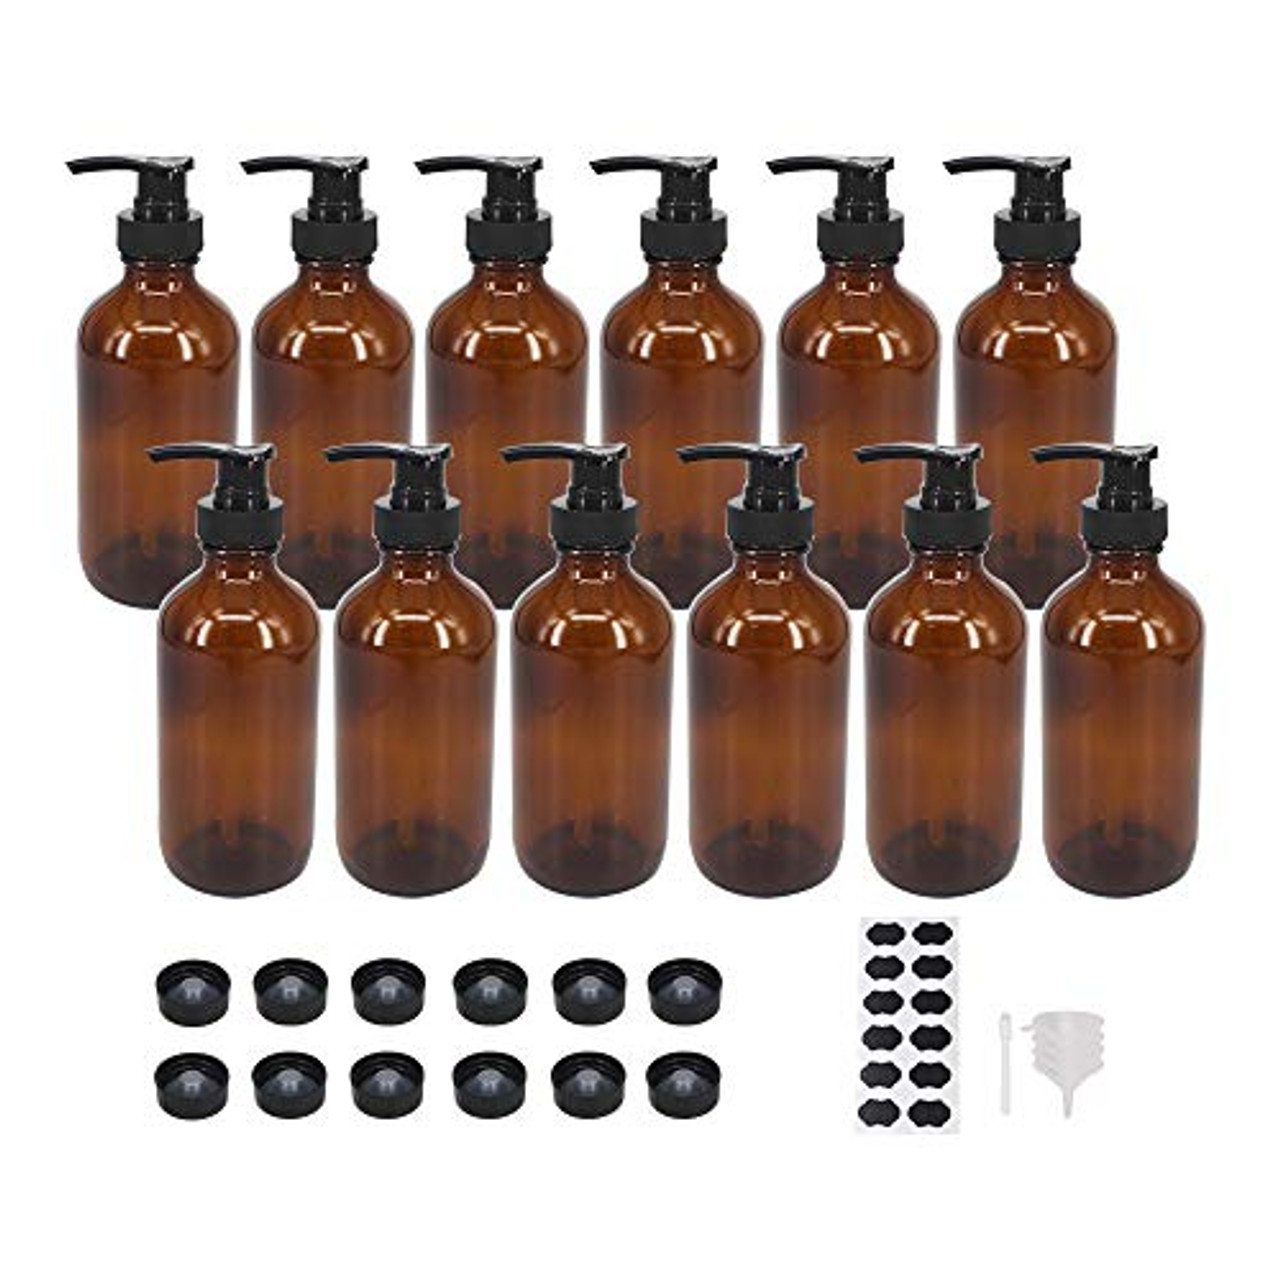 8oz. Apothecary Bottles Set of 12 - Quick Candles